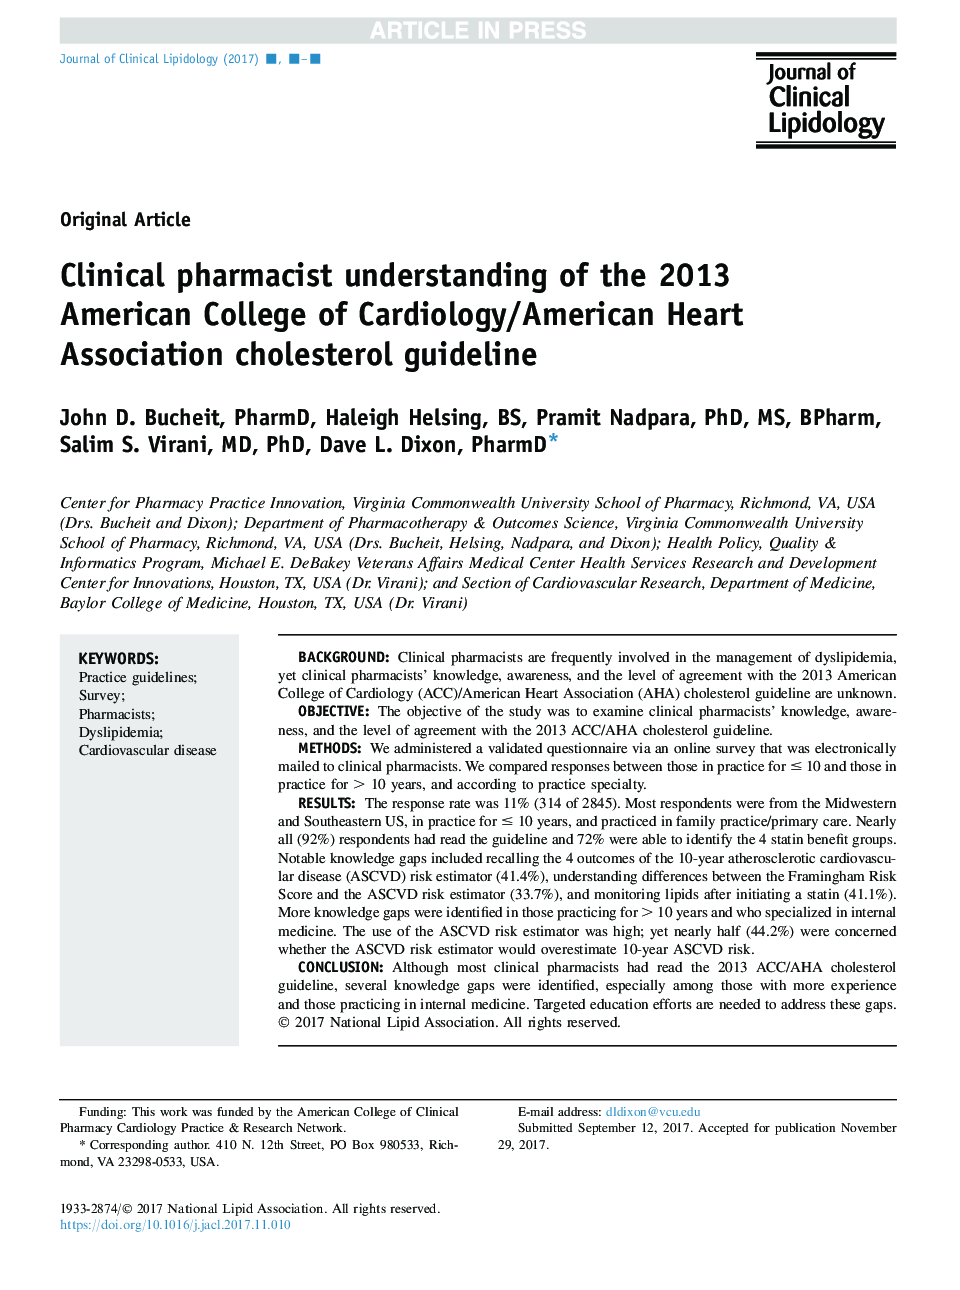 Clinical pharmacist understanding of the 2013 American College of Cardiology/American Heart Association cholesterol guideline